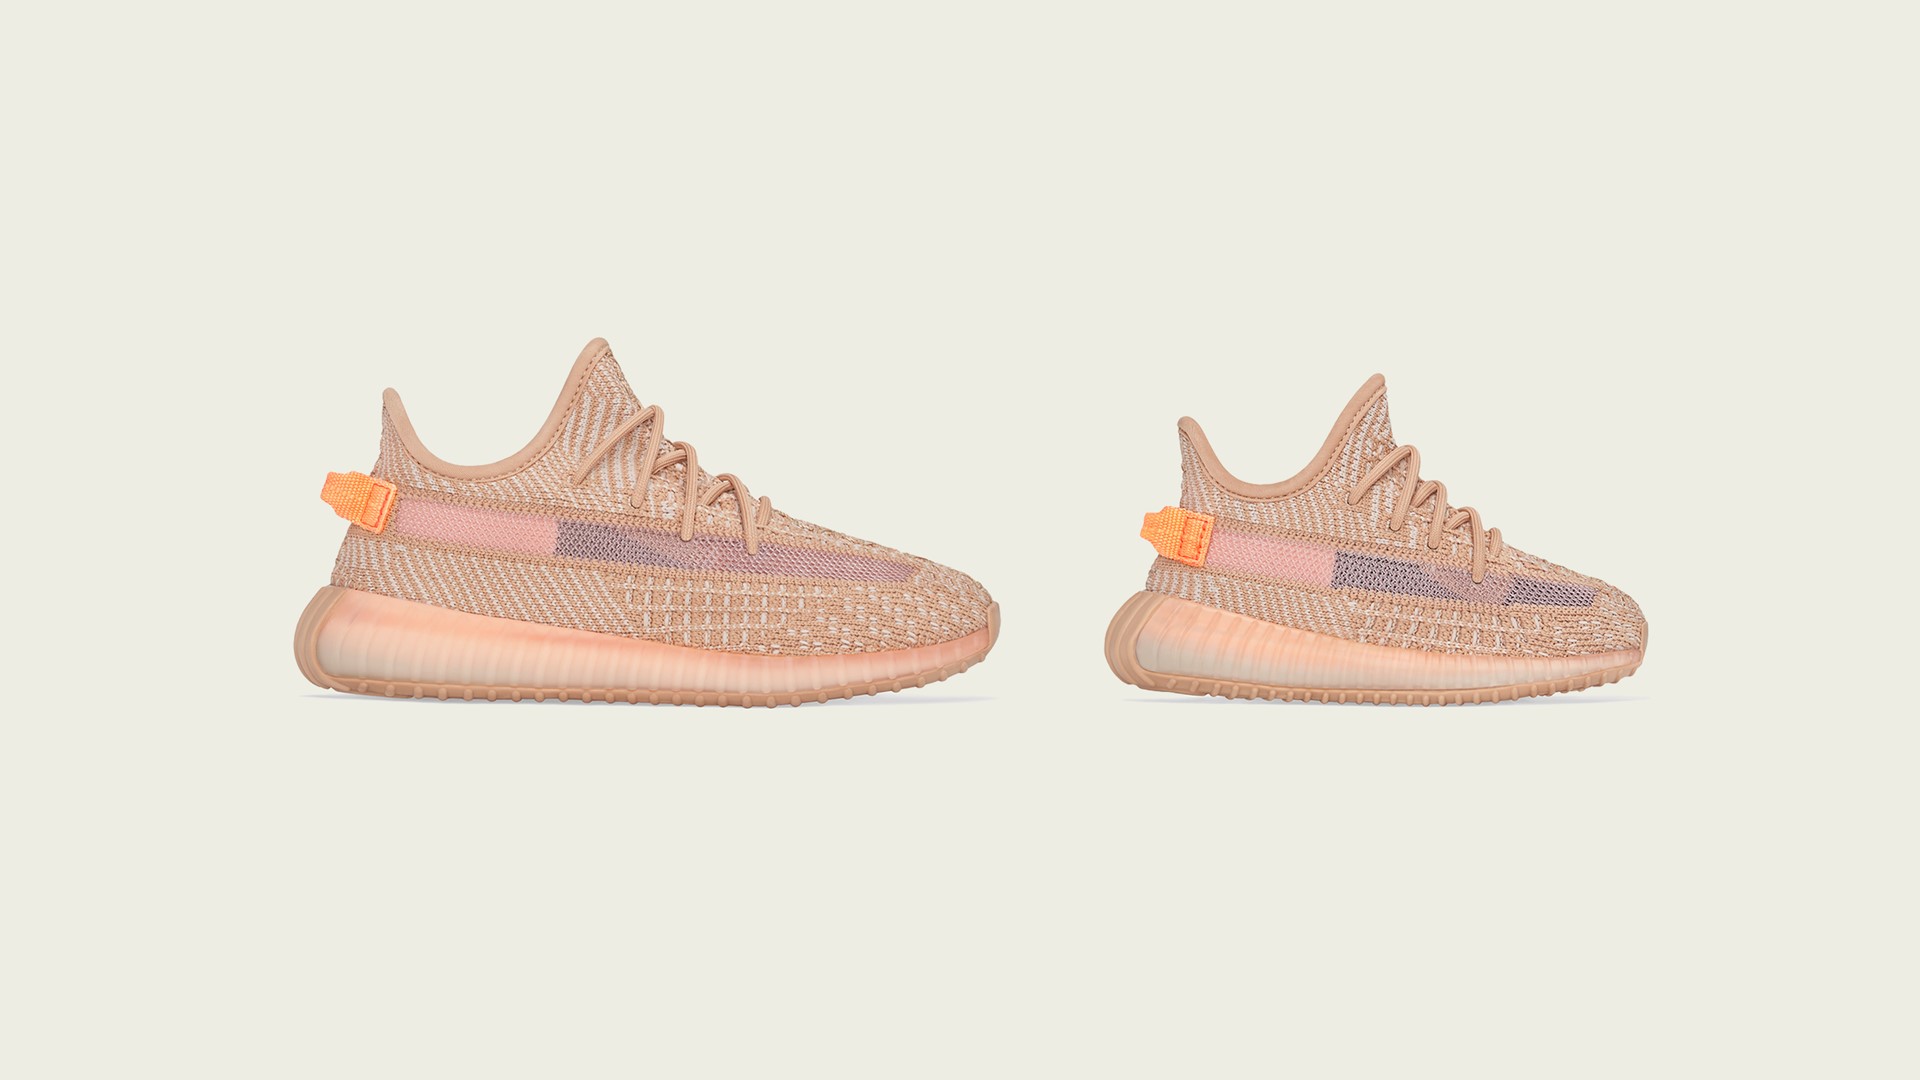 Disse Uendelighed fordøje adidas + KANYE WEST announce the YEEZY BOOST 350 V2 Clay